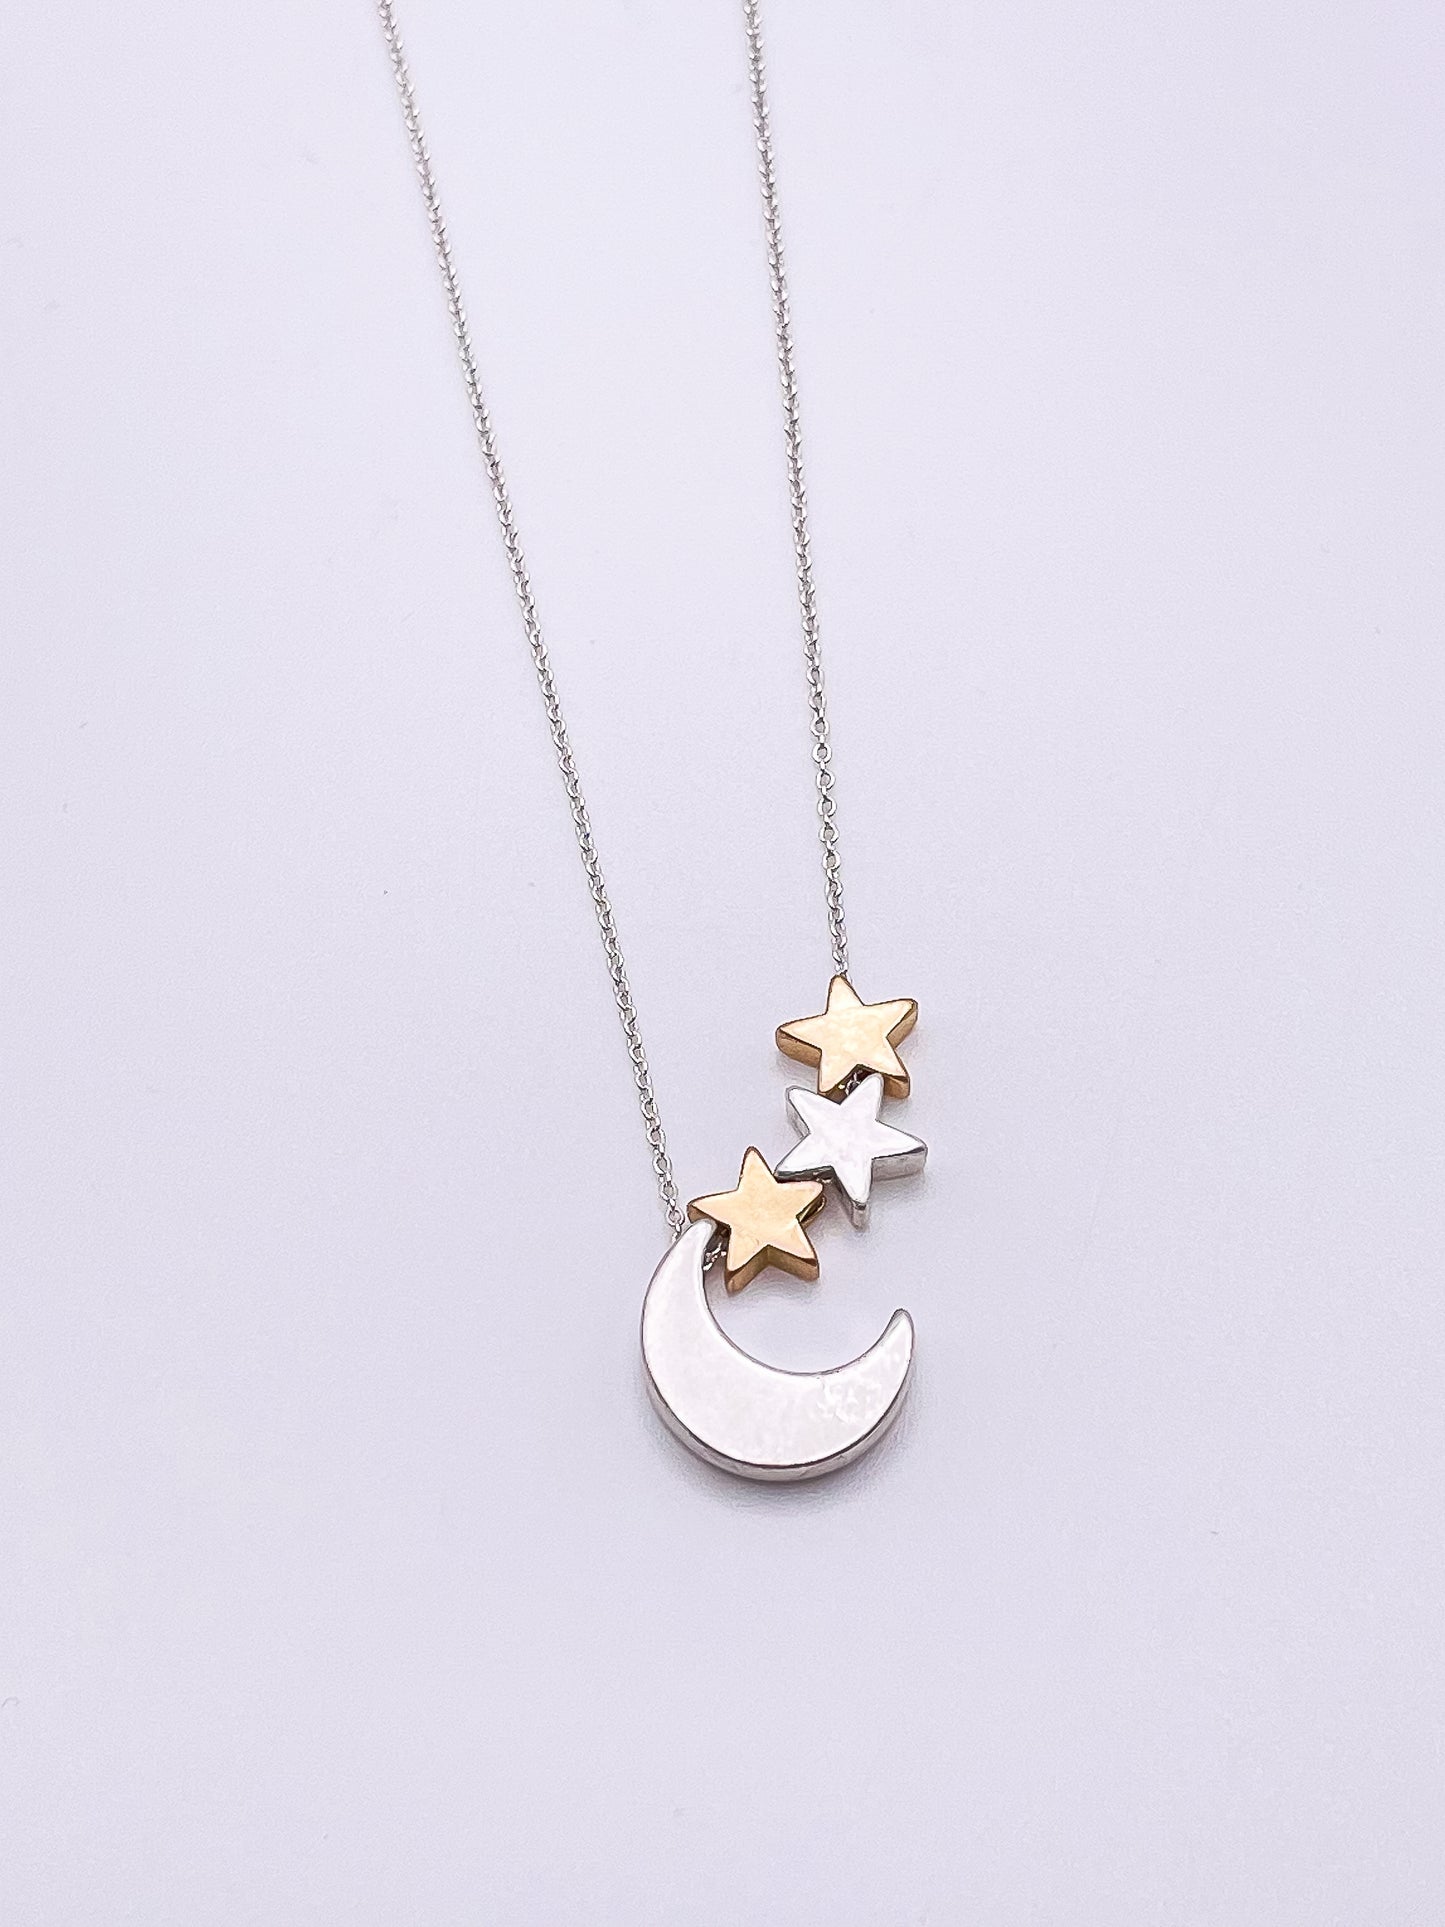 Silver necklace with moon and starts.